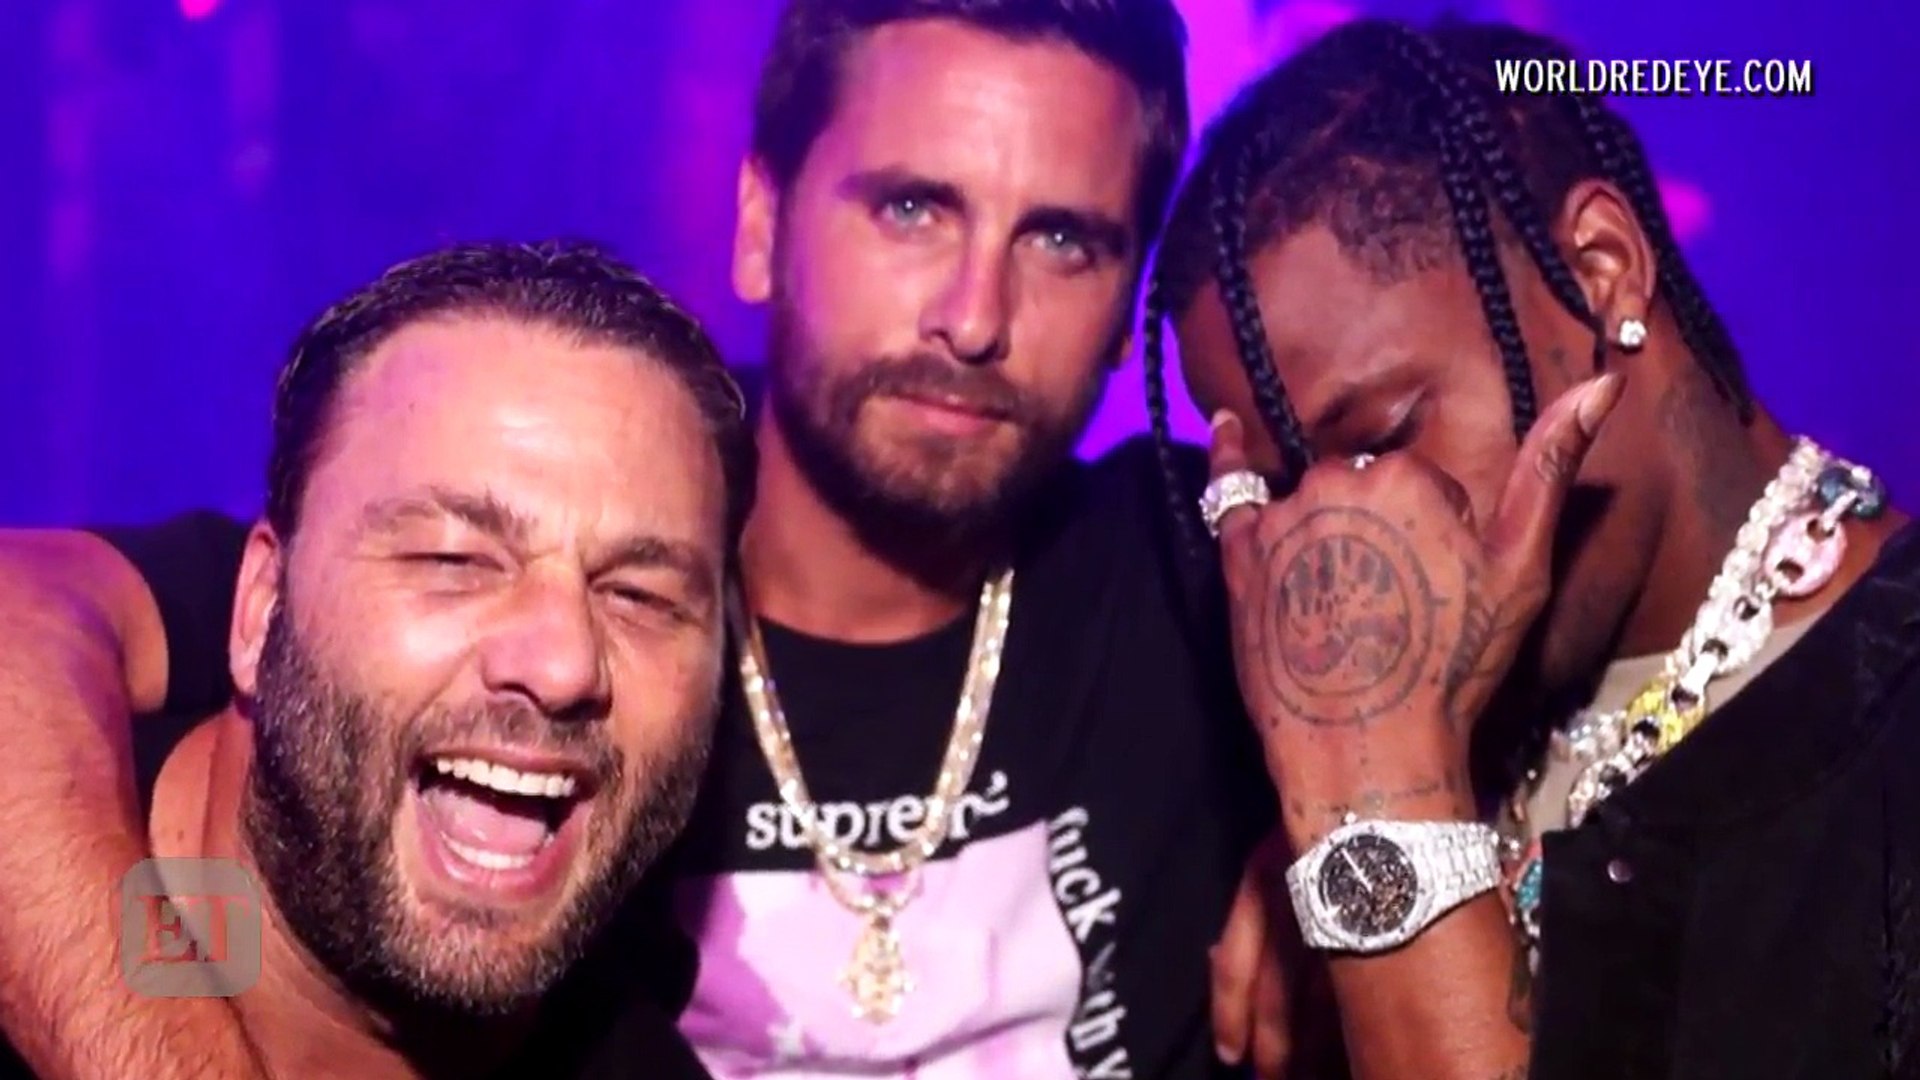 EXCLUSIVE - Travis Scott Seen Partying With Scott Disick in Miami Amid Kylie Jenner Pregnancy News-L